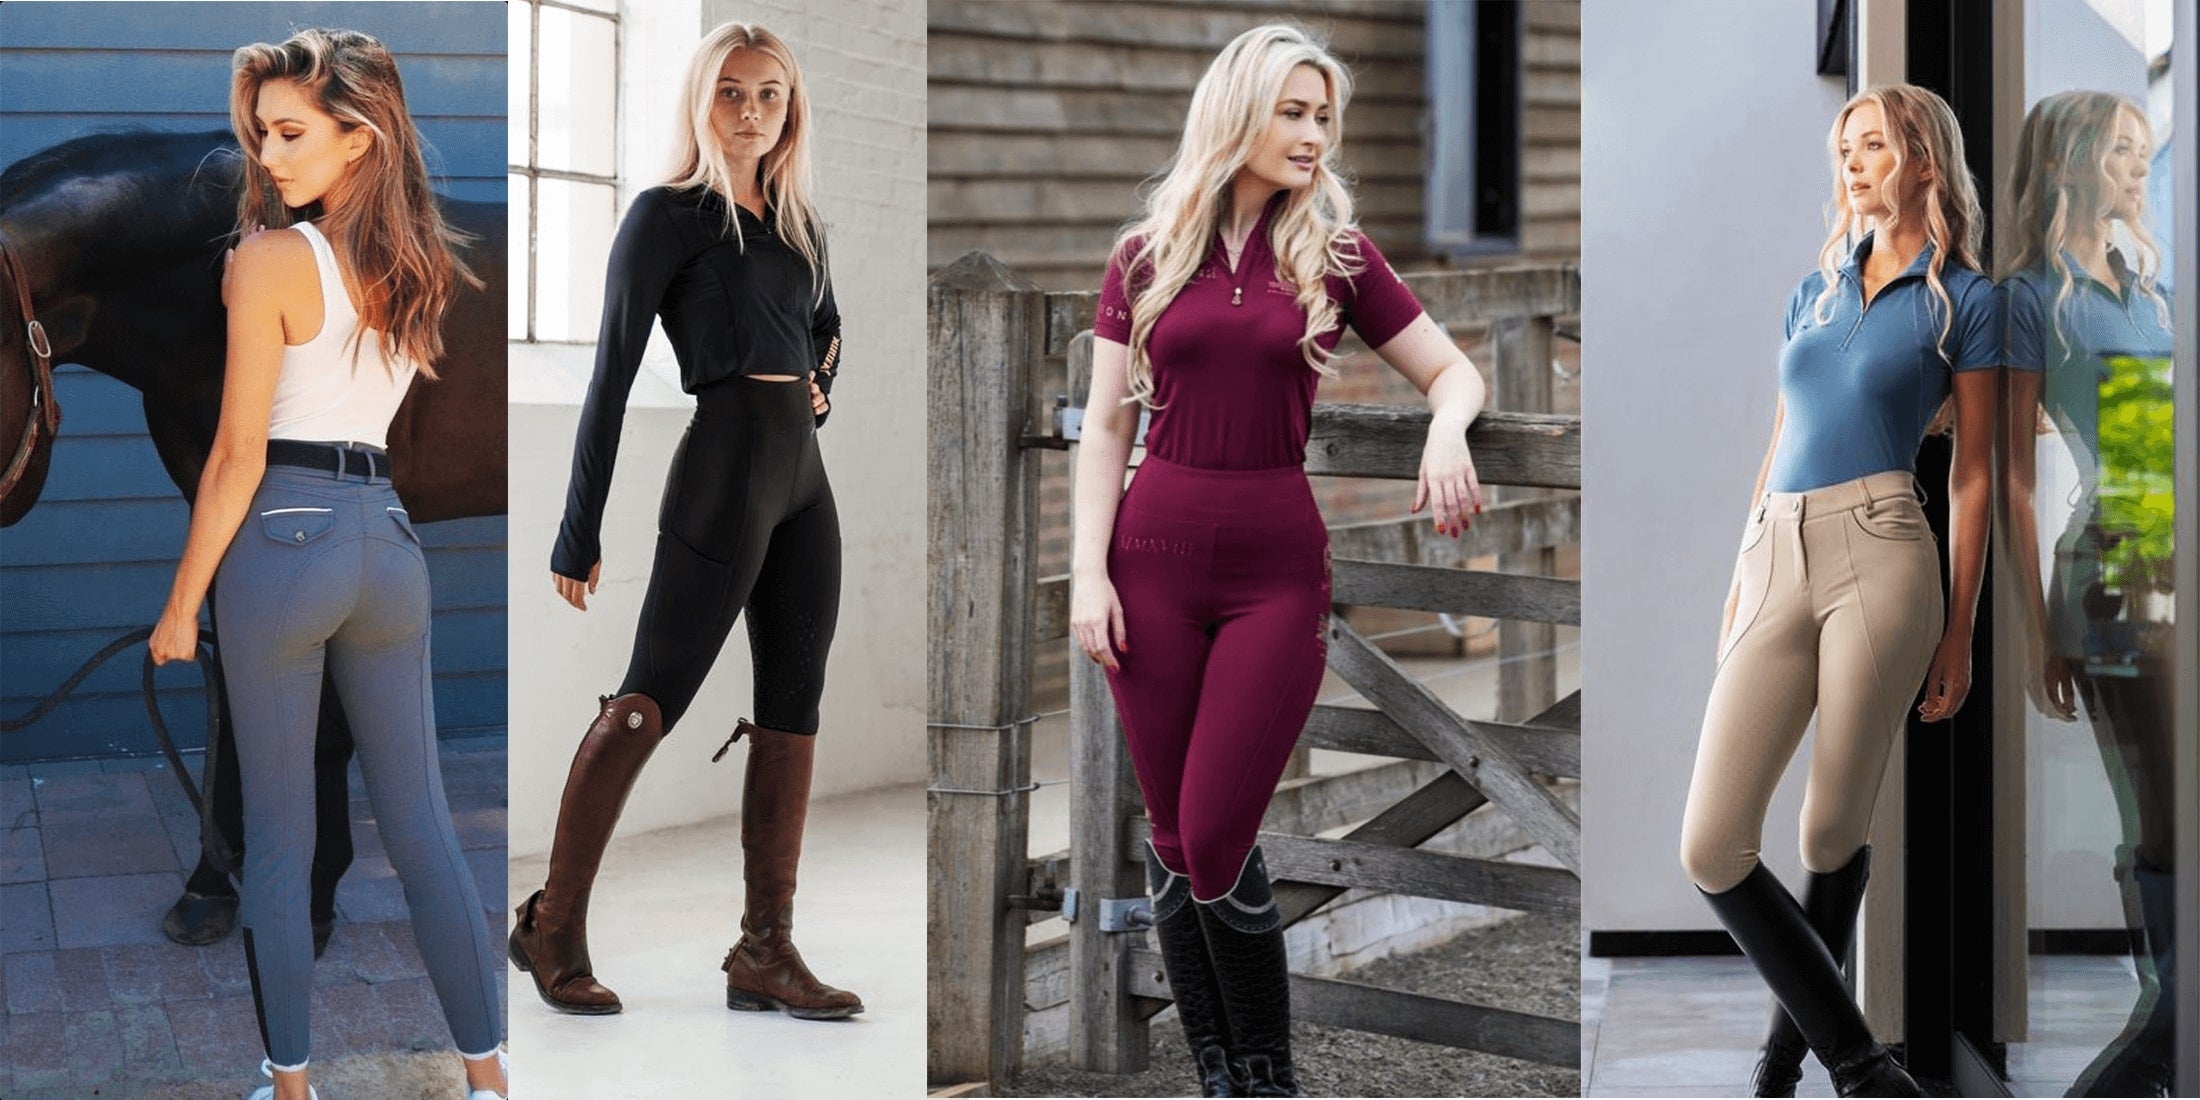 What Materials Are Typically Used in Women's Jodhpurs, and Why?